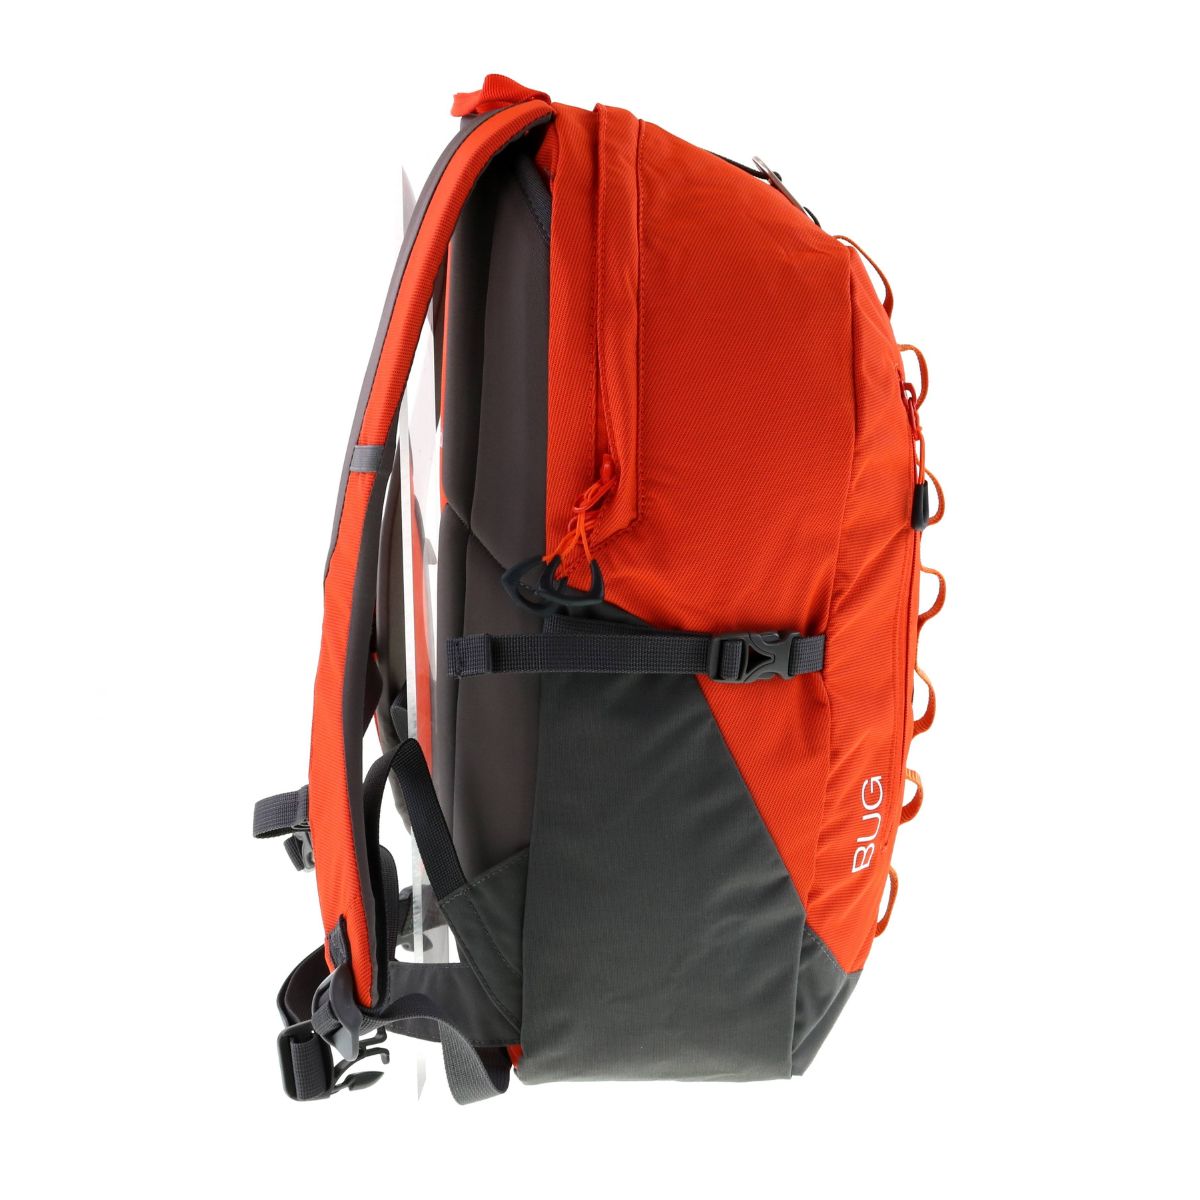 Bug Backpack for Single-day Multi-pitch Climbing - Red/Orange